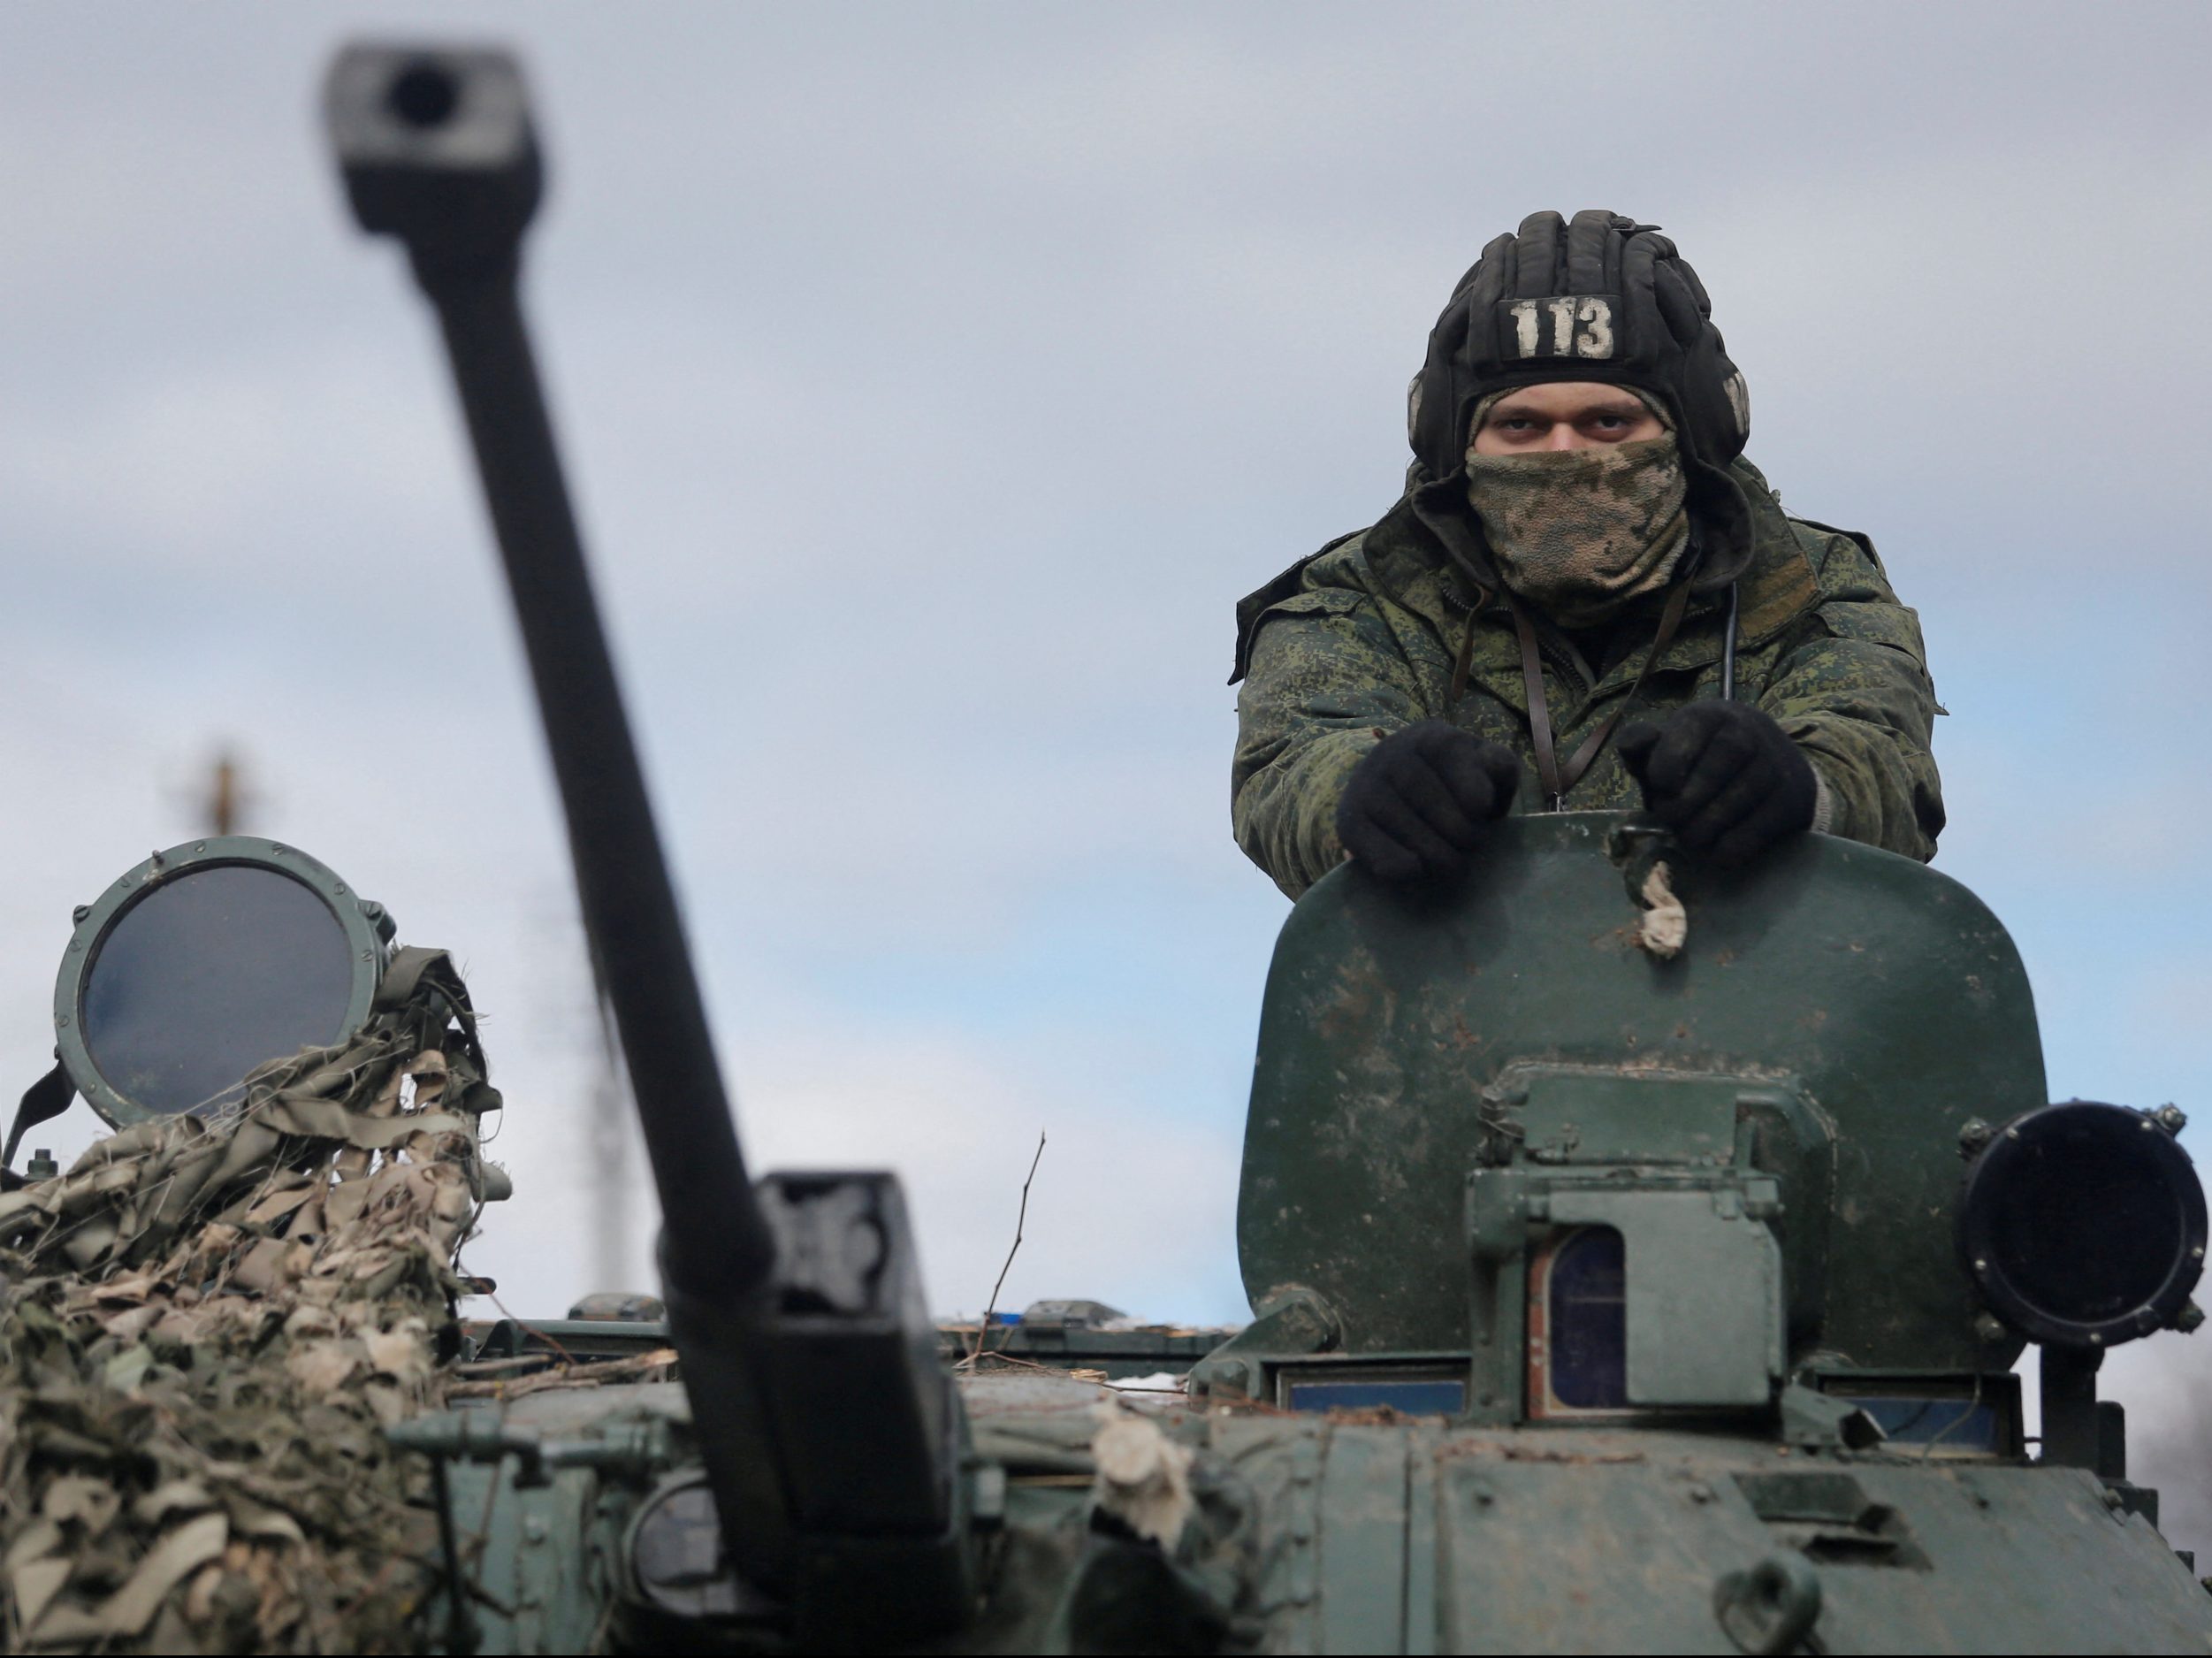 Risk of Escalation Mounts with Increasing Assertiveness from Ukraine